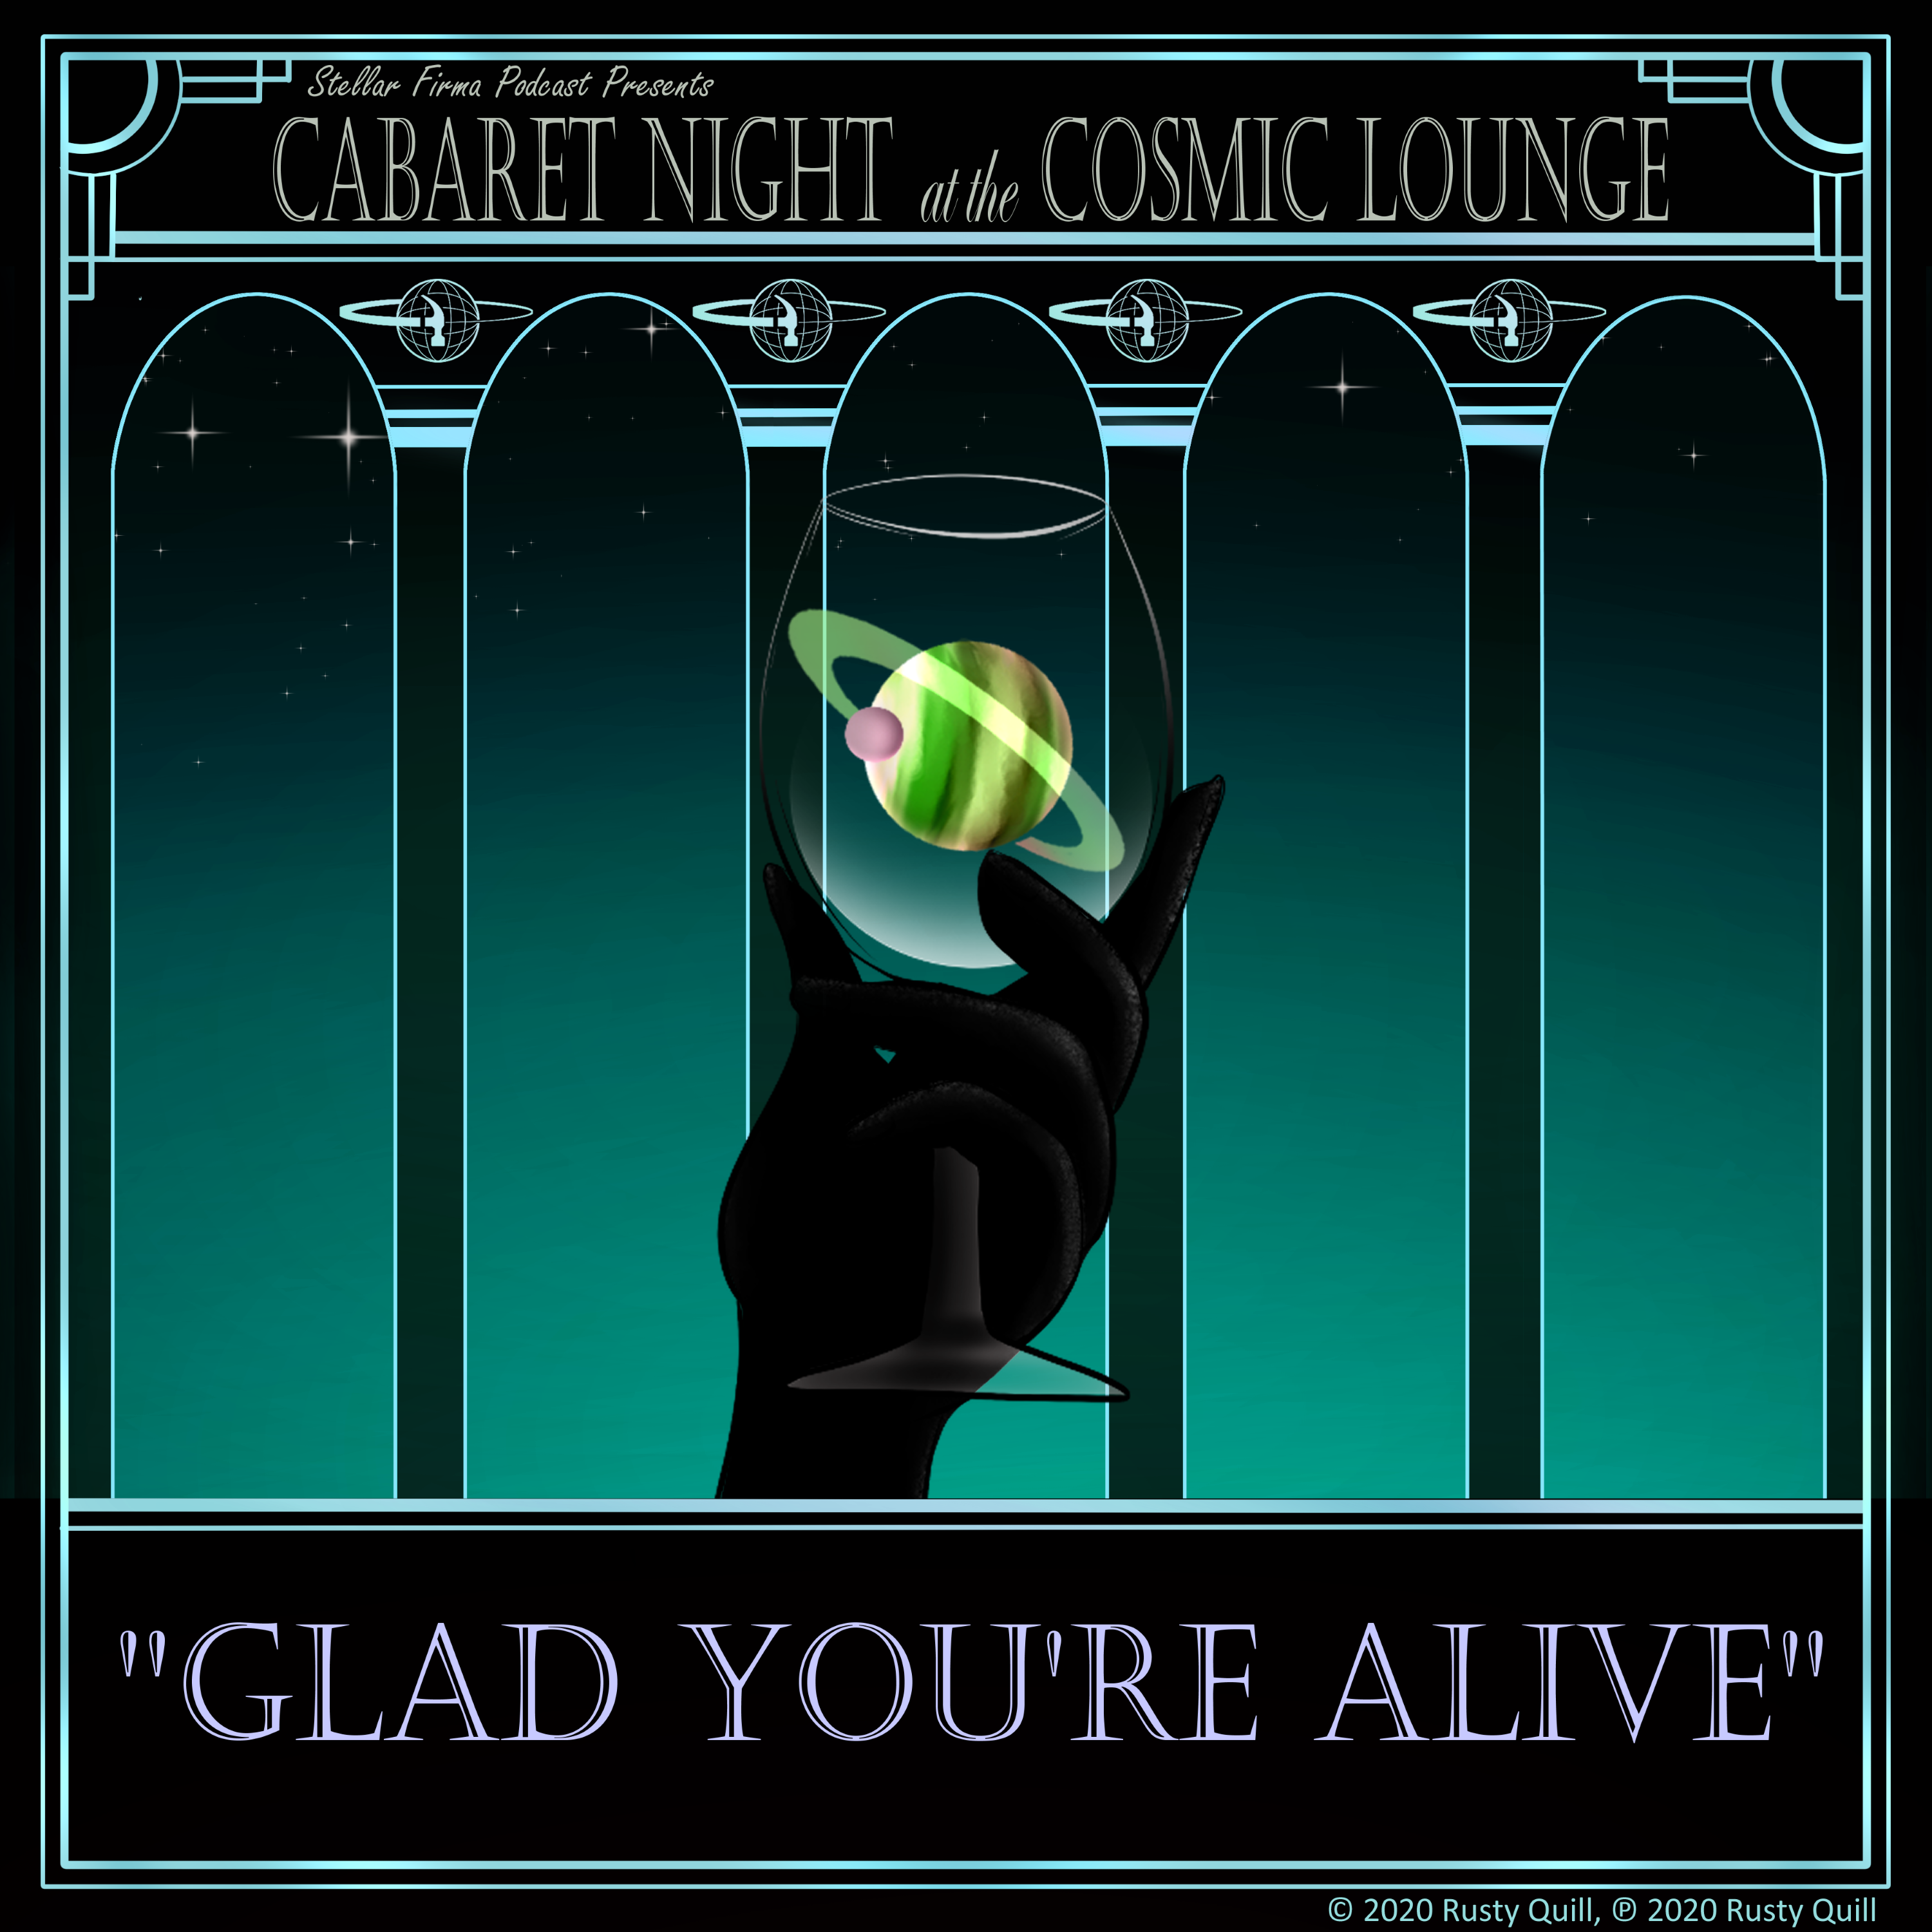 Cabaret Night at the Cosmic Lounge: Glad You're Alive